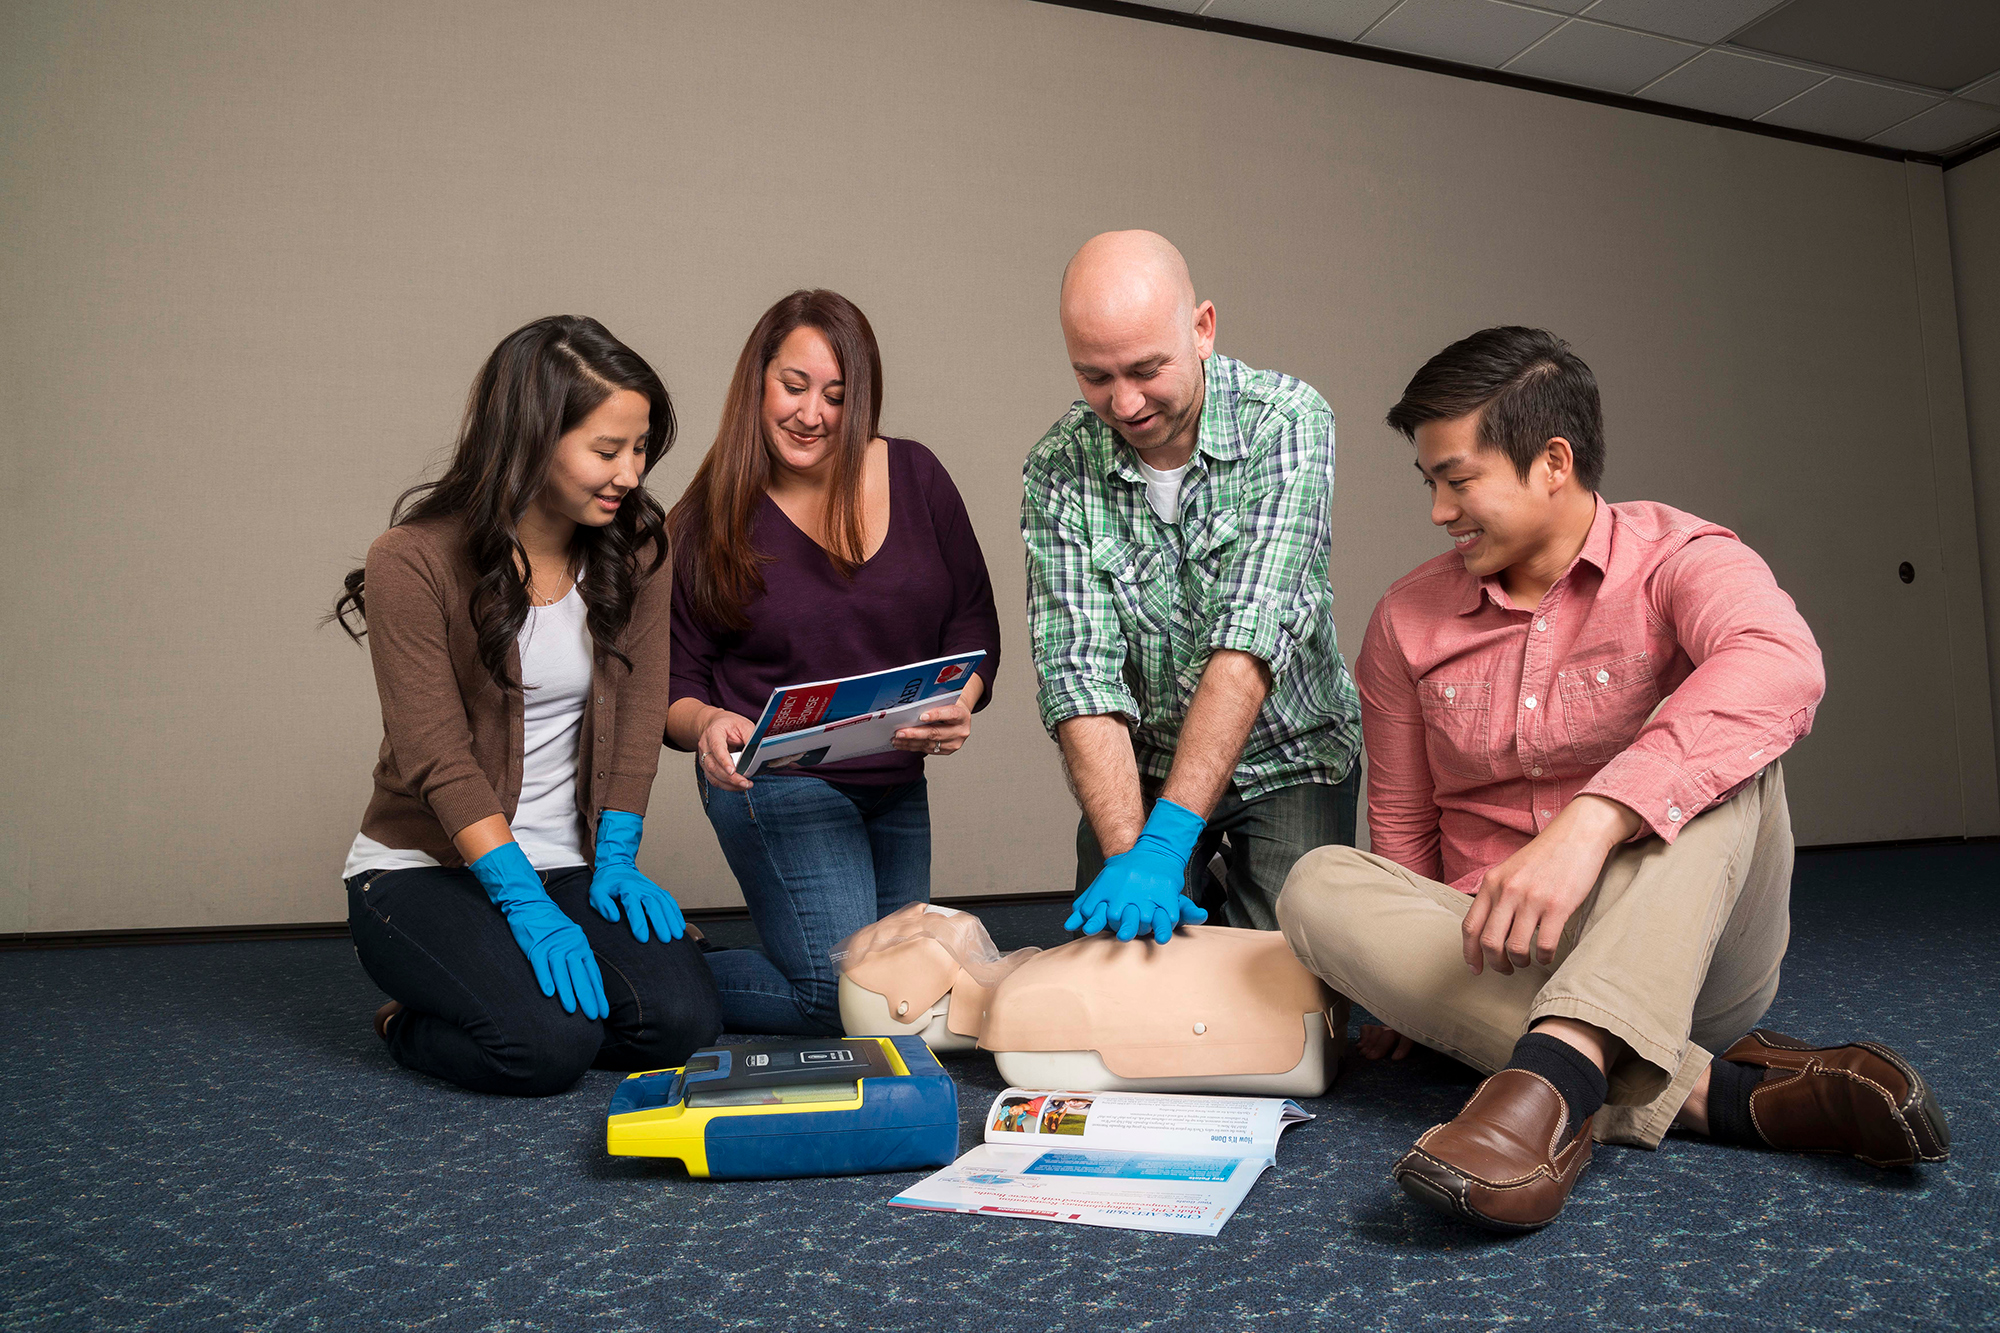 Emergency First Response - CPR - Land CPR certification